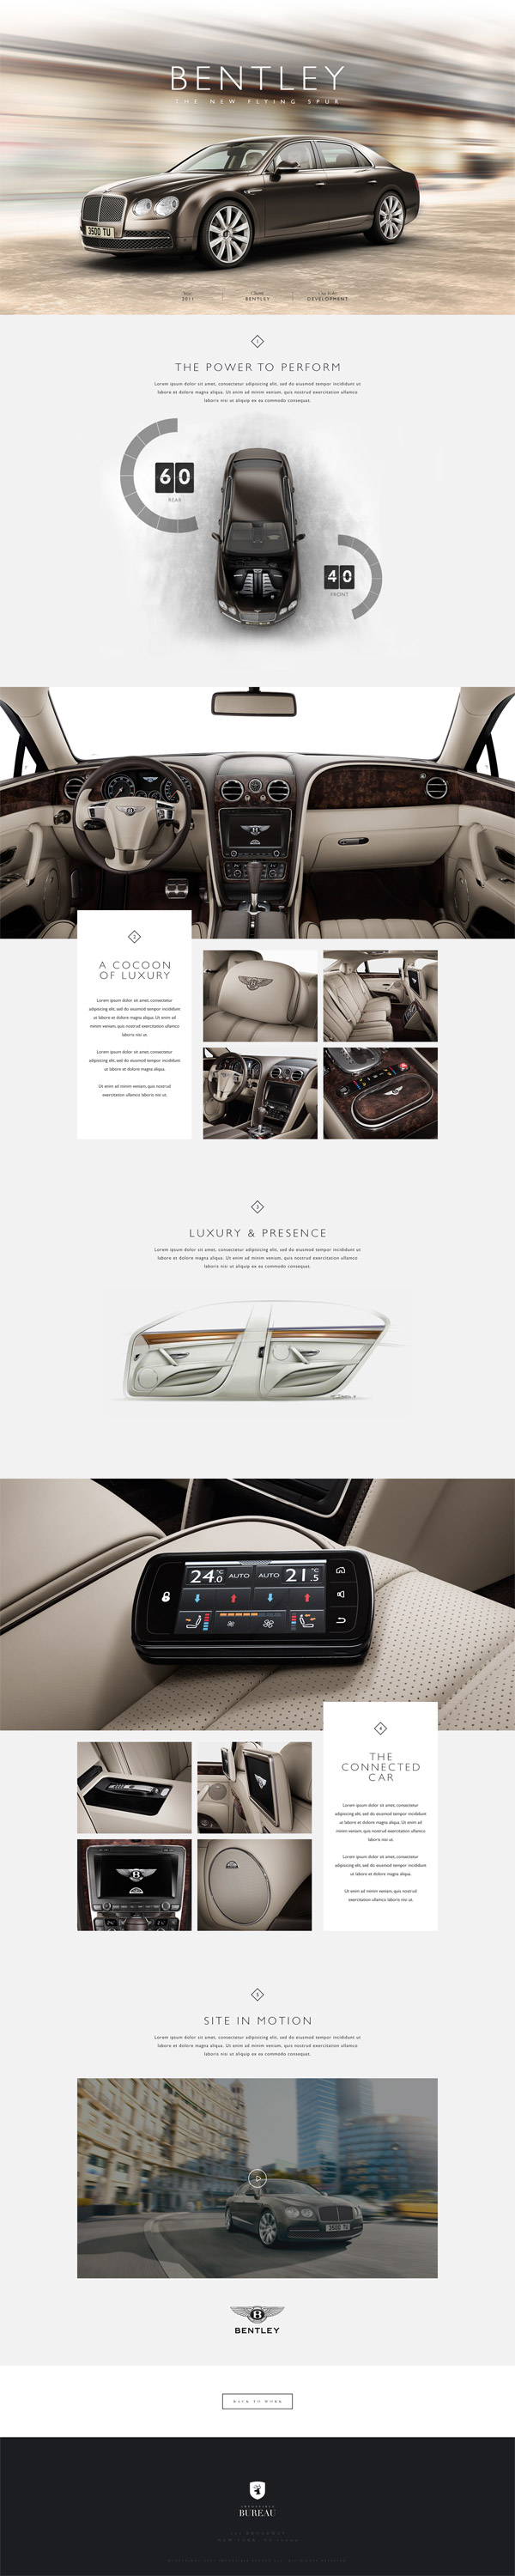 15-websites-with-full-page-designs-12